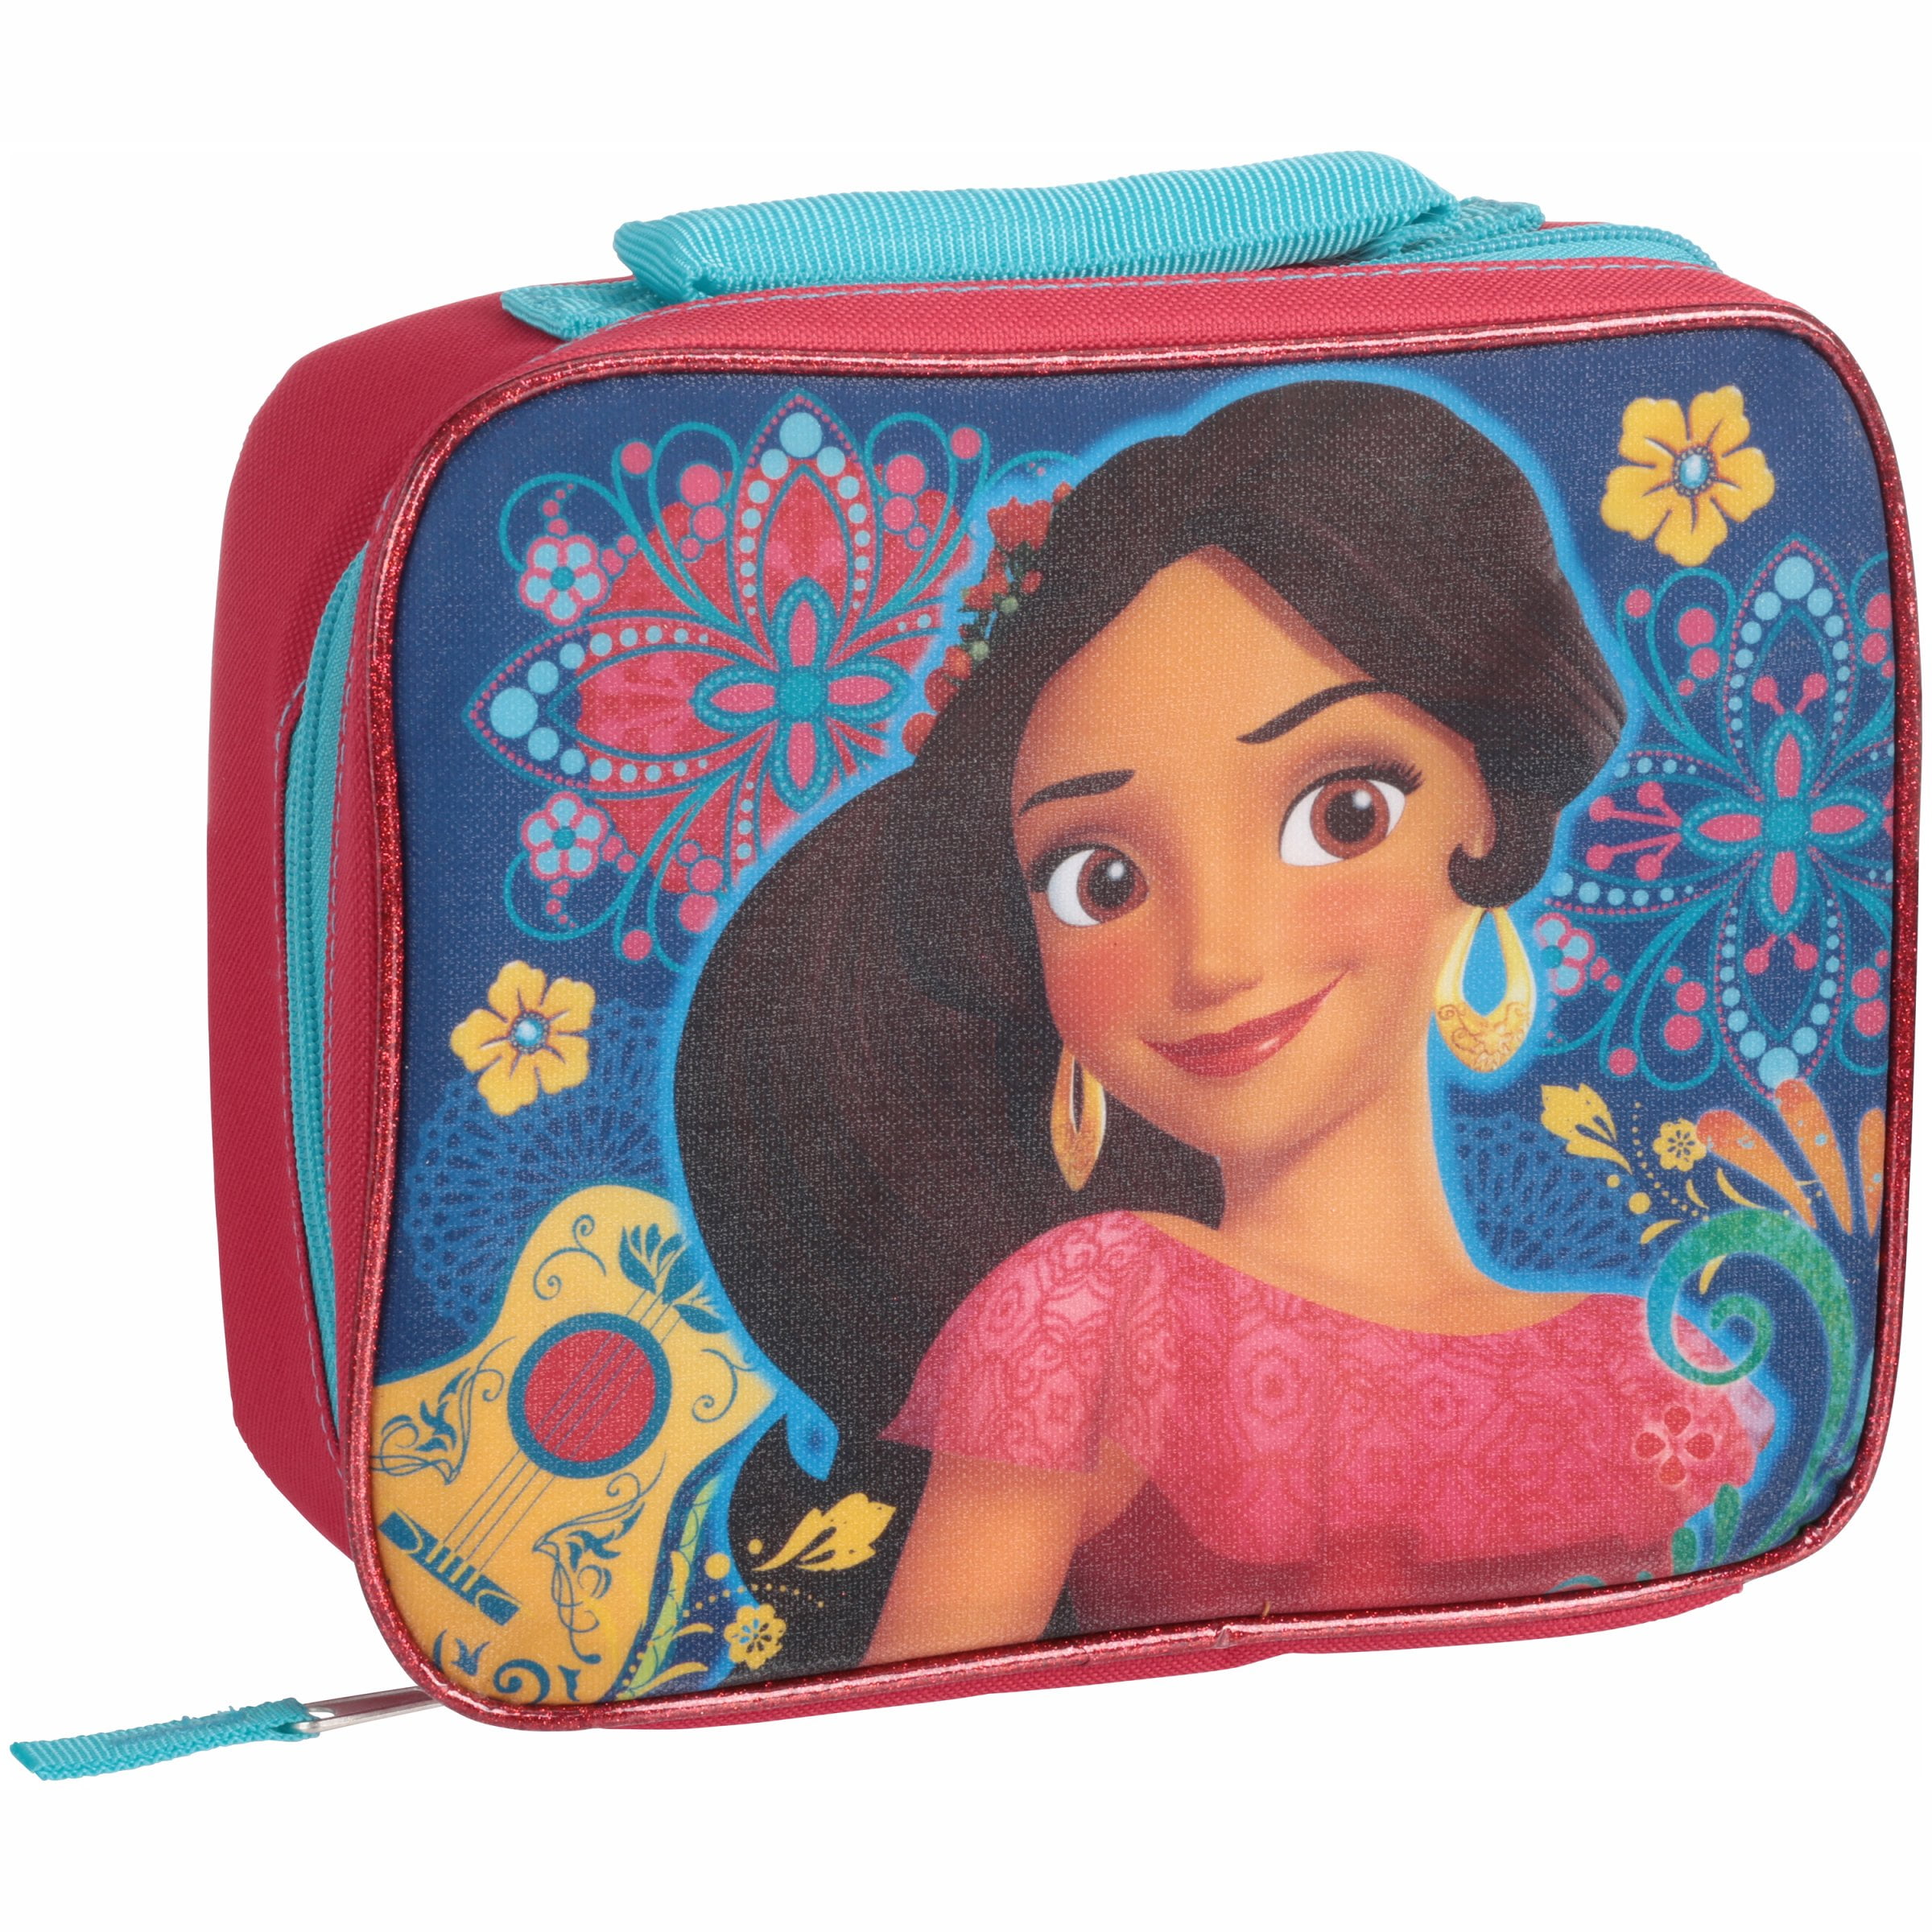 Details about   NWT Disney Store Princess Elena of Avalor Lunch Box Tote School Insulated Bag 